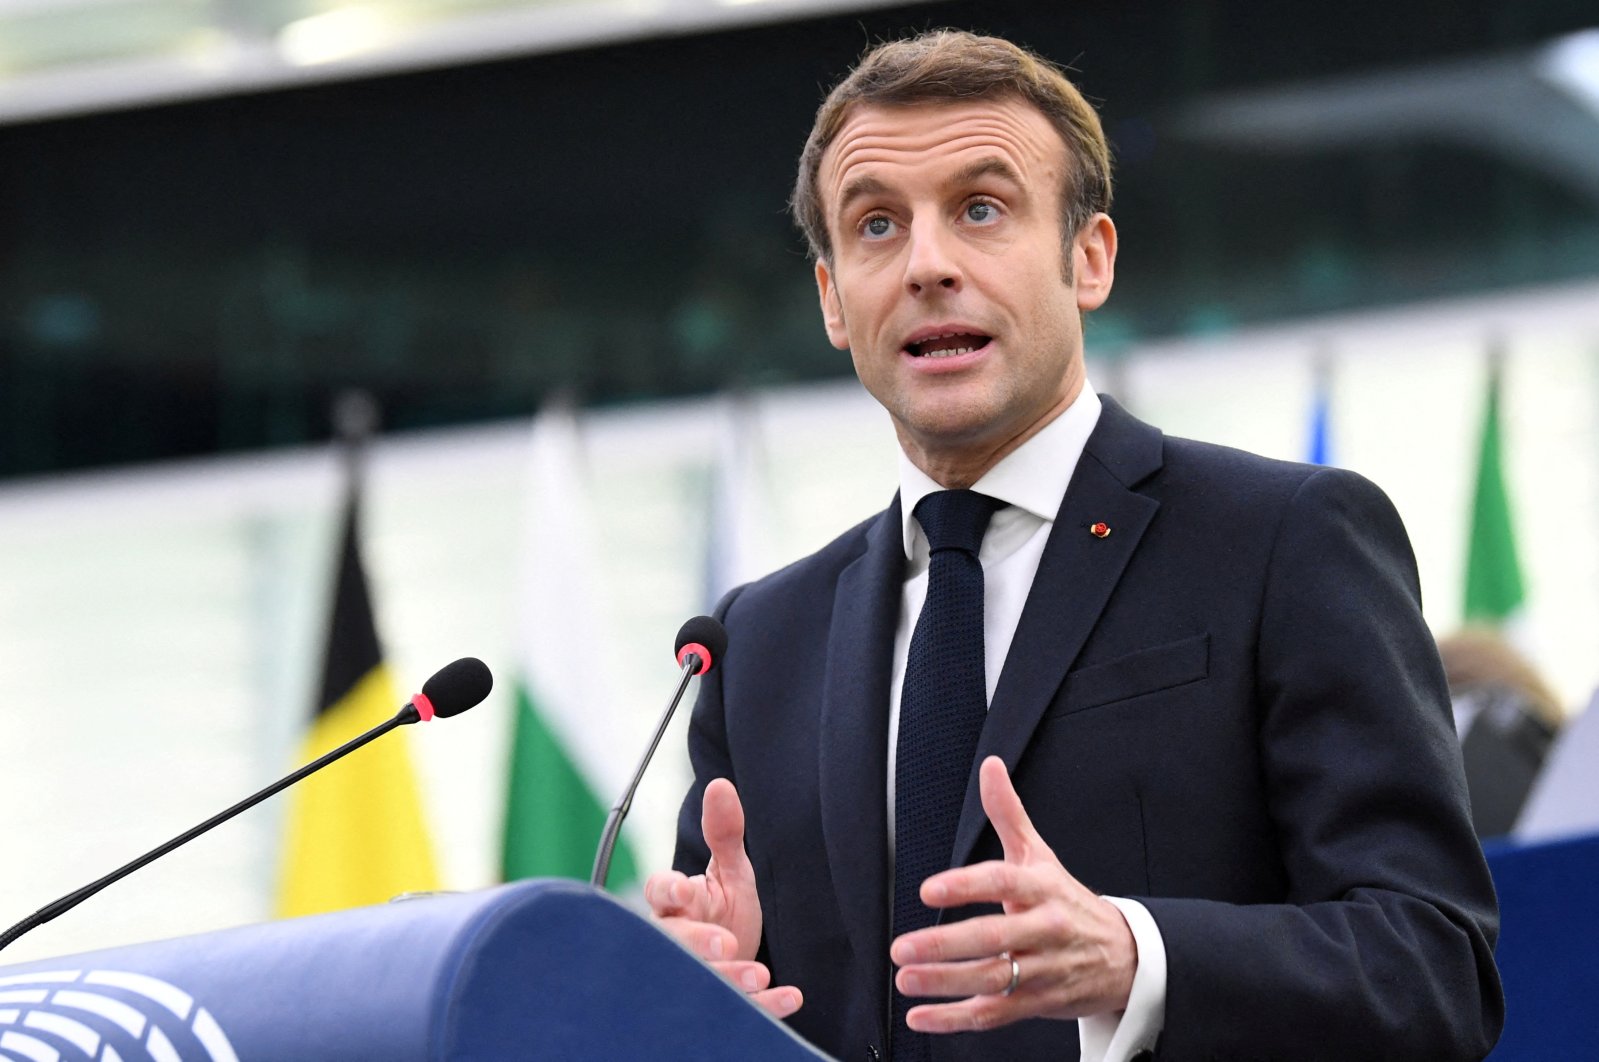 French President Emmanuel Macron addresses a plenary session of the European Parliament to present the program of activities of the French Presidency as France currently holds the European Union rotating presidency, Strasbourg, France, Jan. 19, 2022. (Reuters Photo)